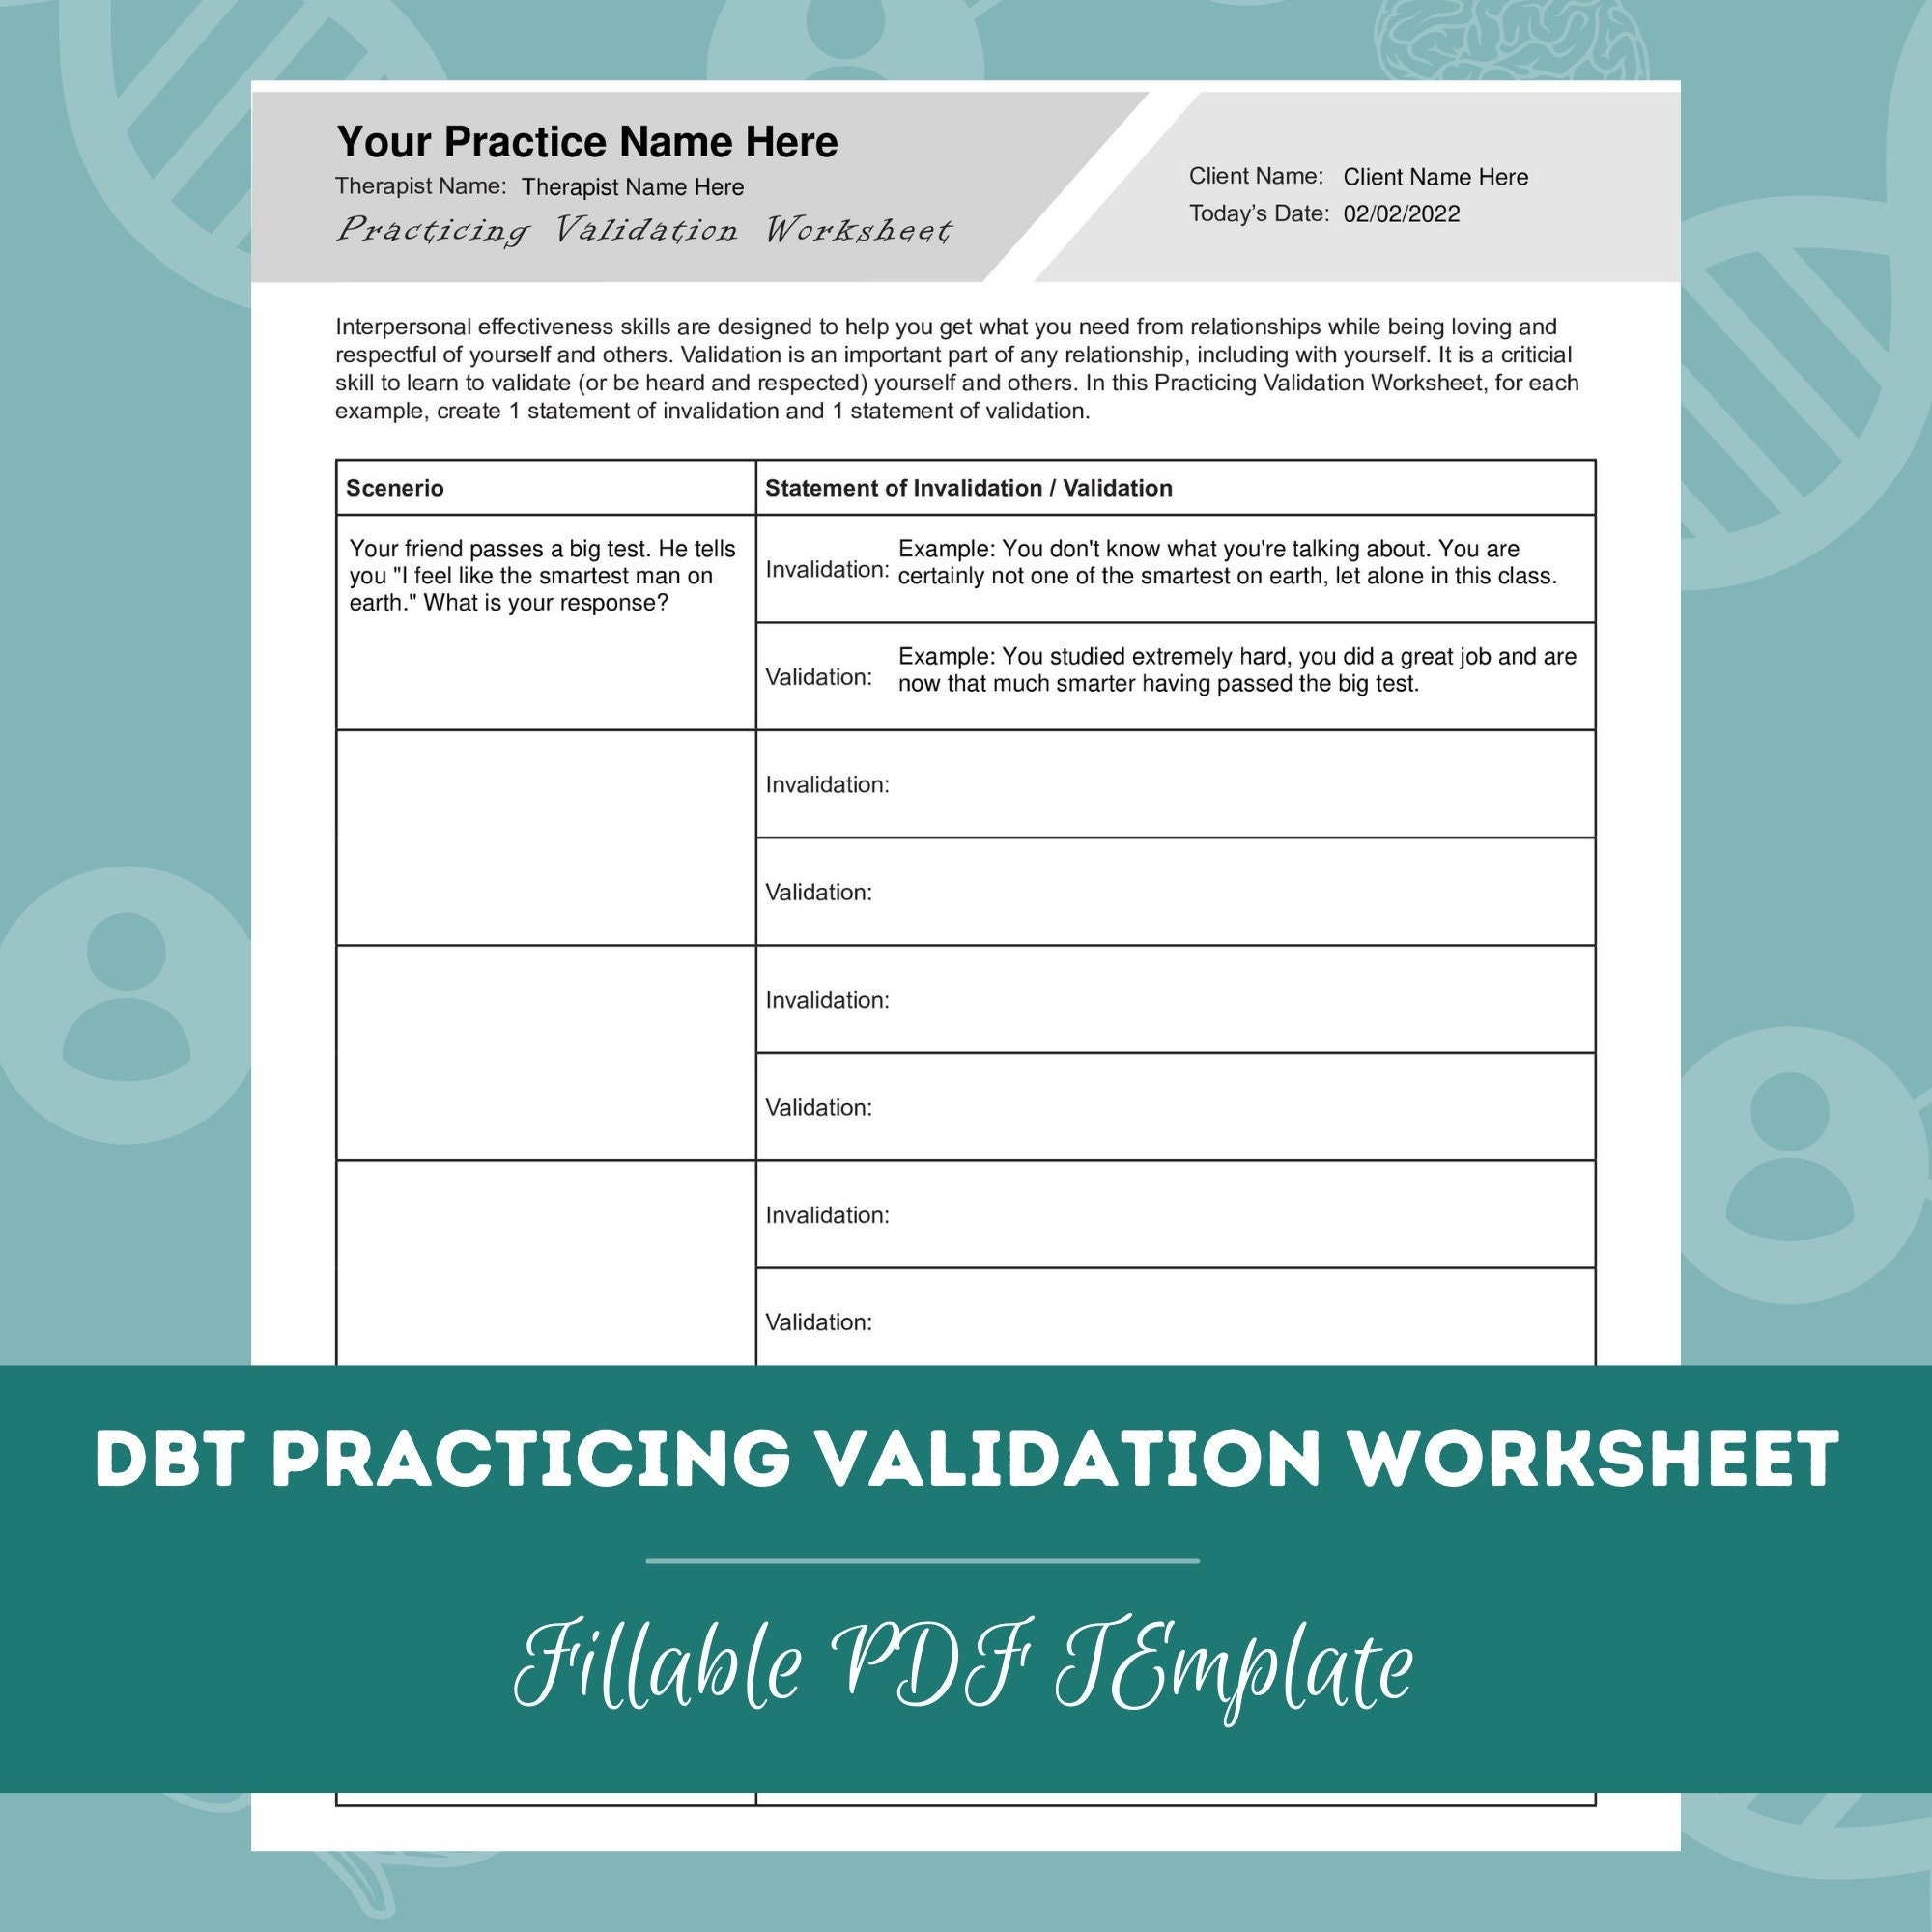 DBT Practicing Validation Worksheet Editable Fillable PDF Template For Counselors Psychologists Social Workers Therapists Etsy Singapore